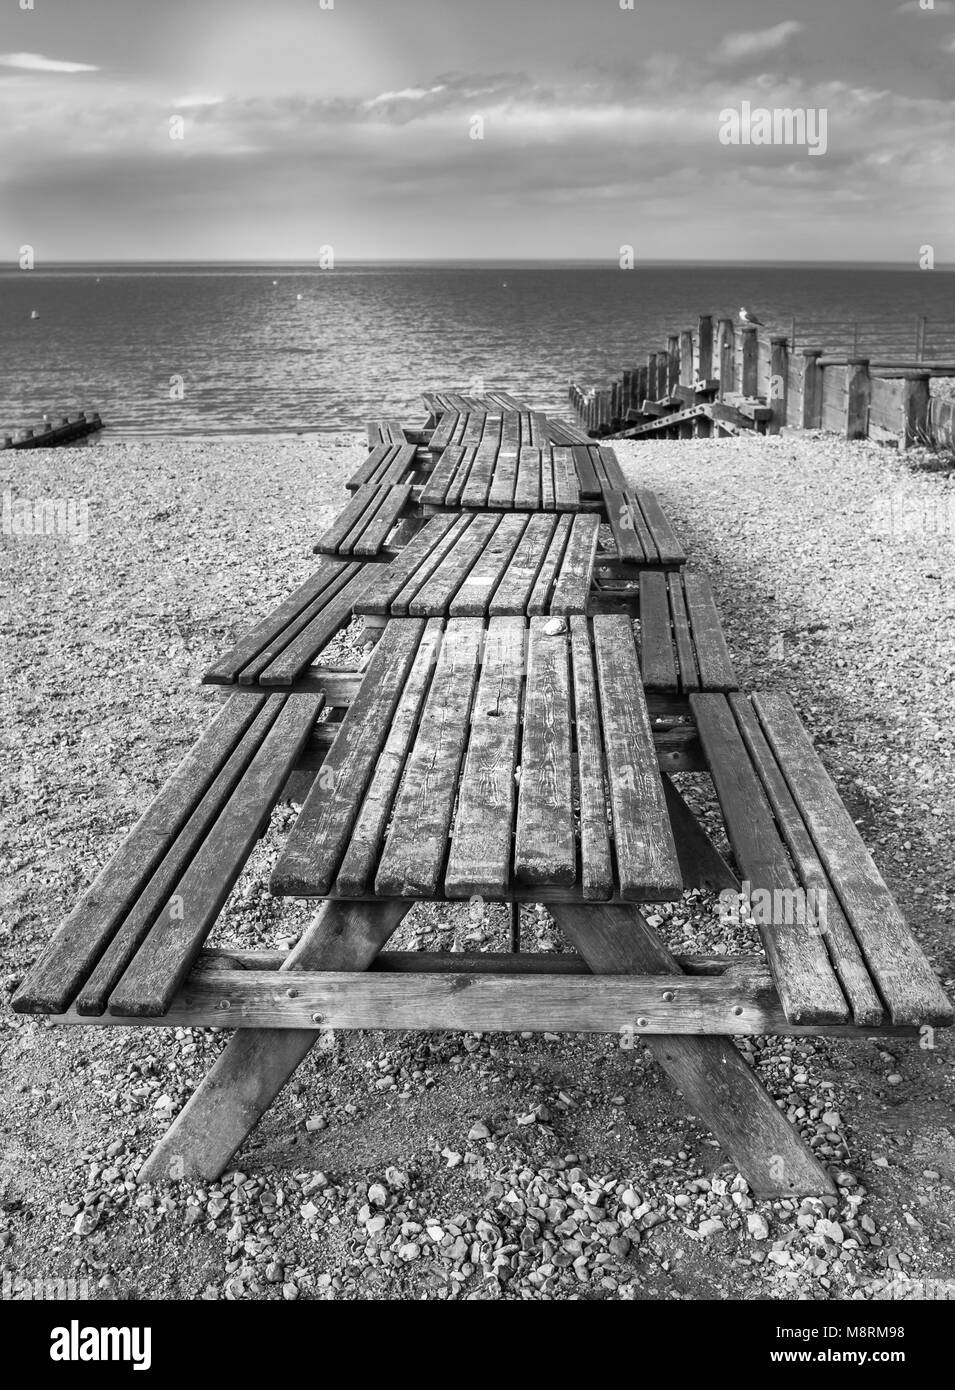 a row of wooden picnic bench tables on Whitstable beach, Kent, Uk, with wooden groynes and a view of the horizon over the sea in black and white Stock Photo